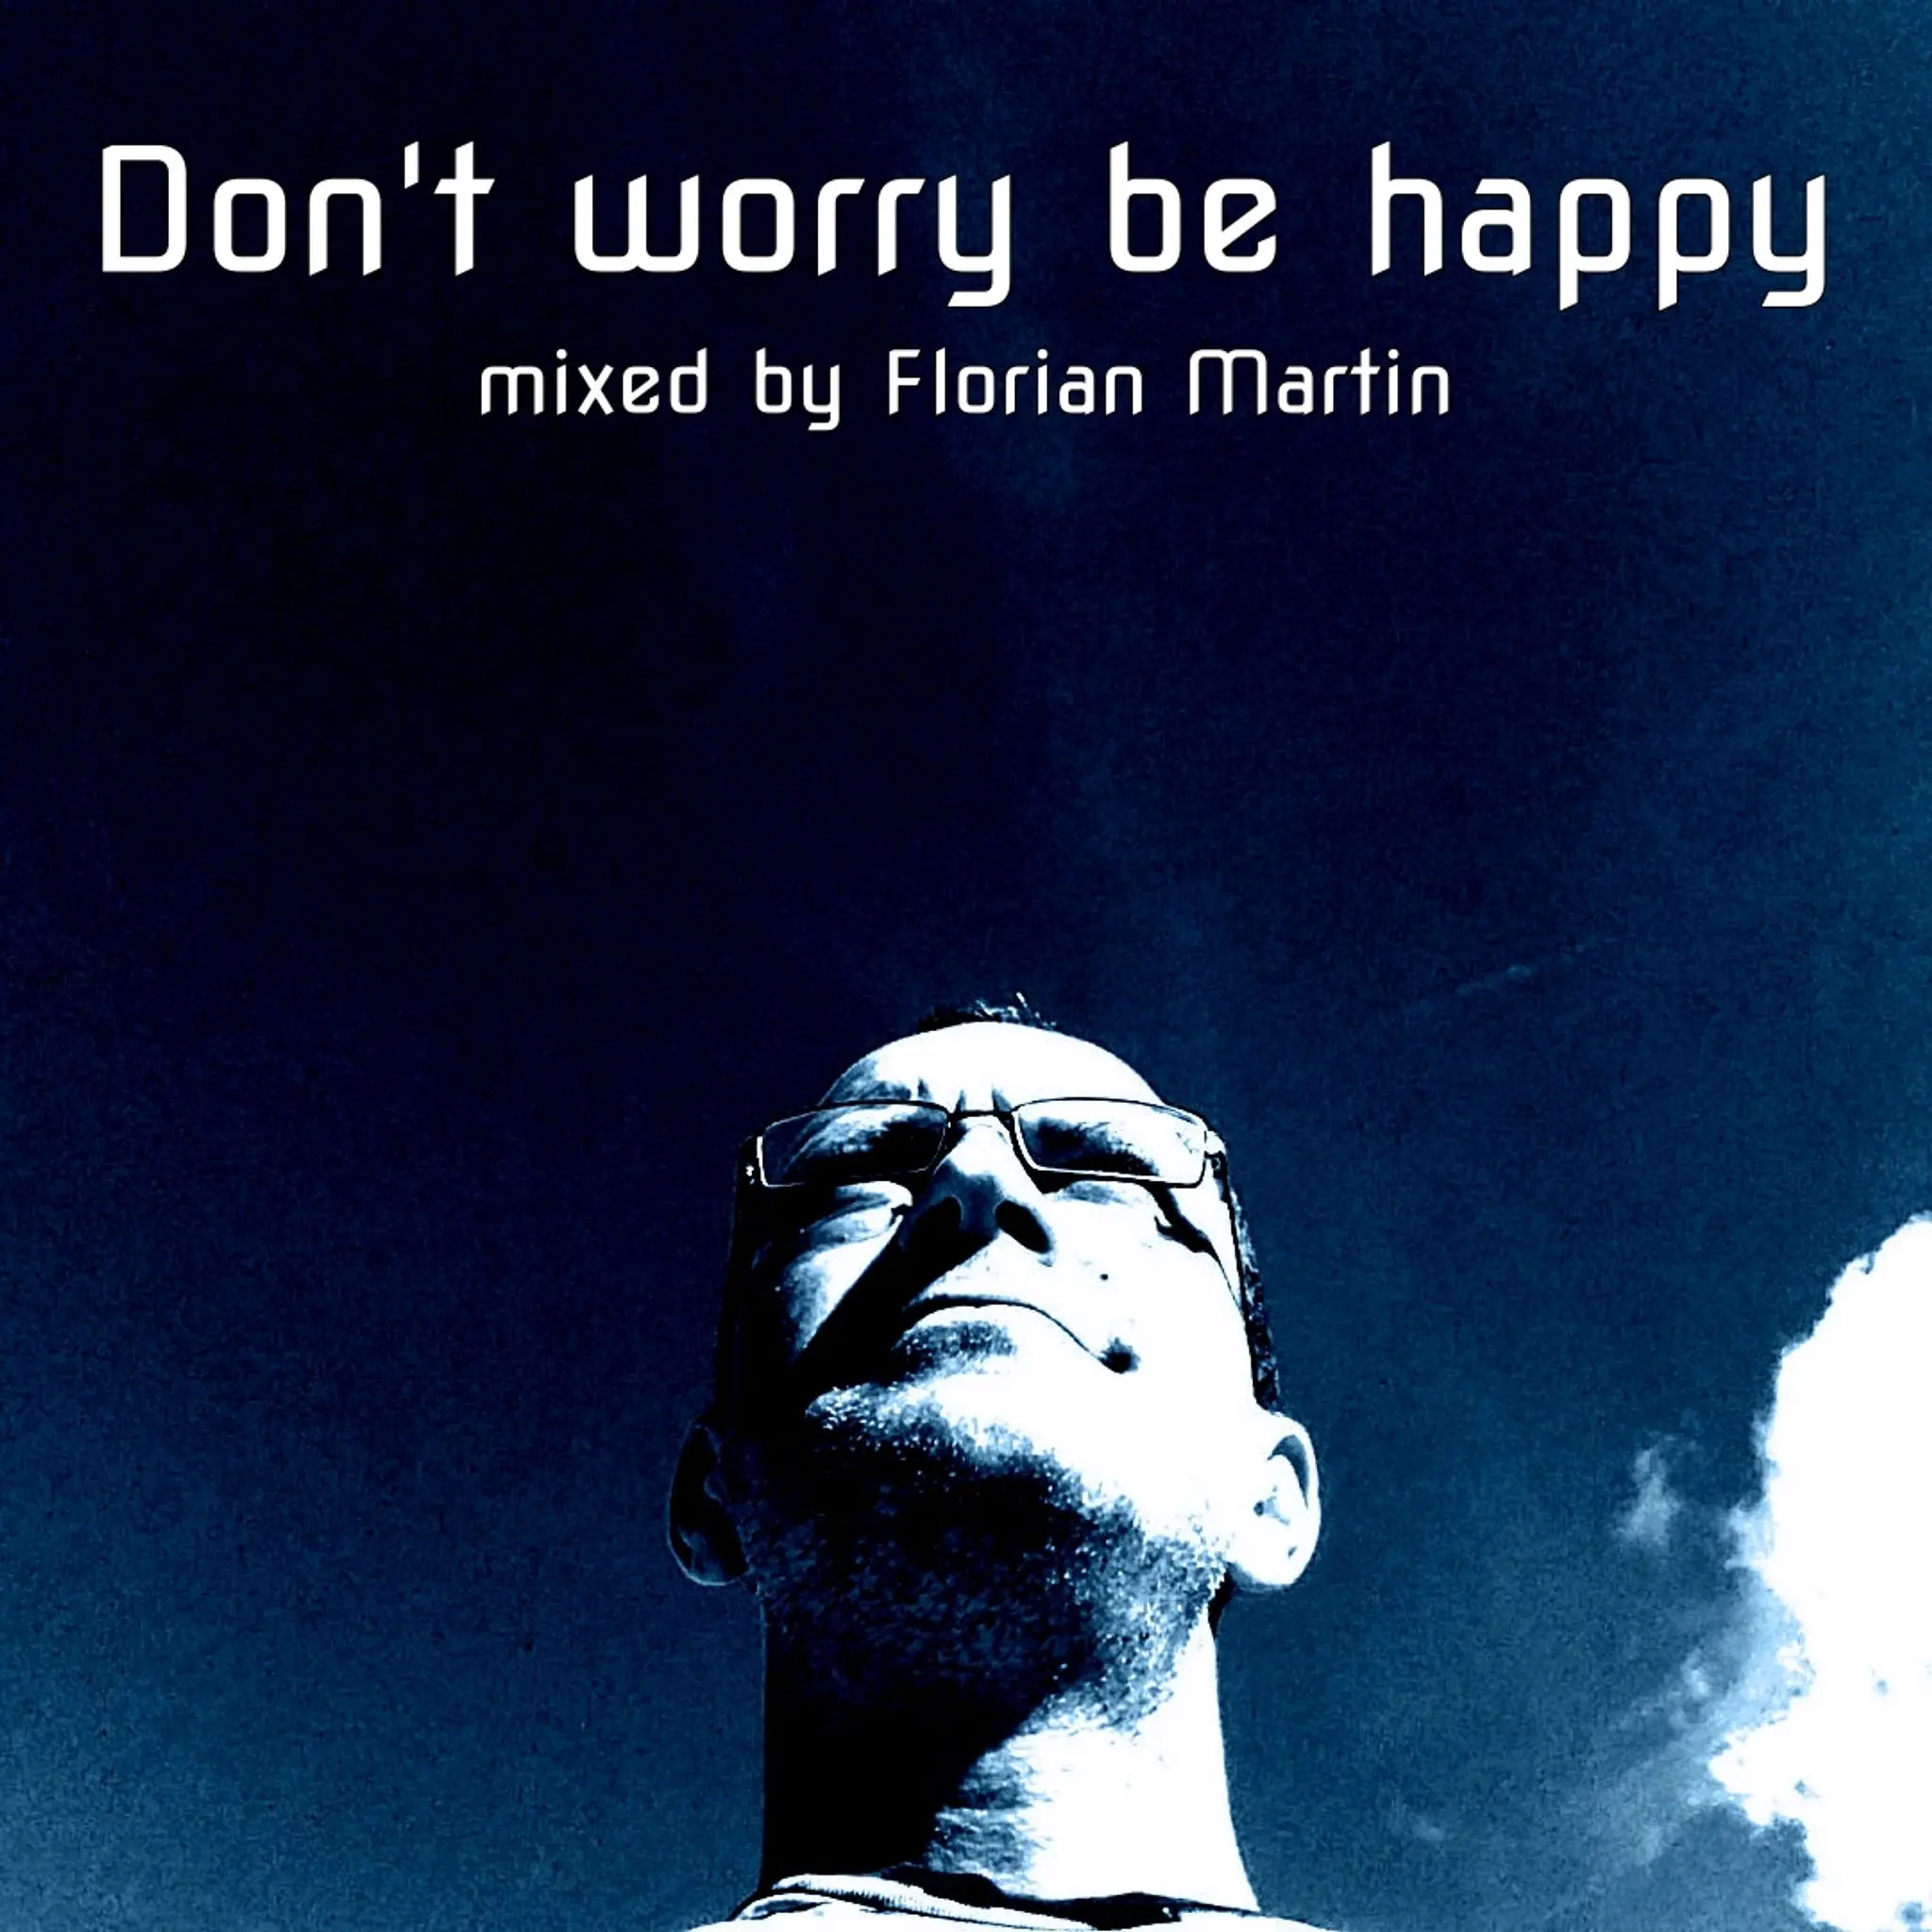 Don't worry be happy (mixed by Florian Martin)